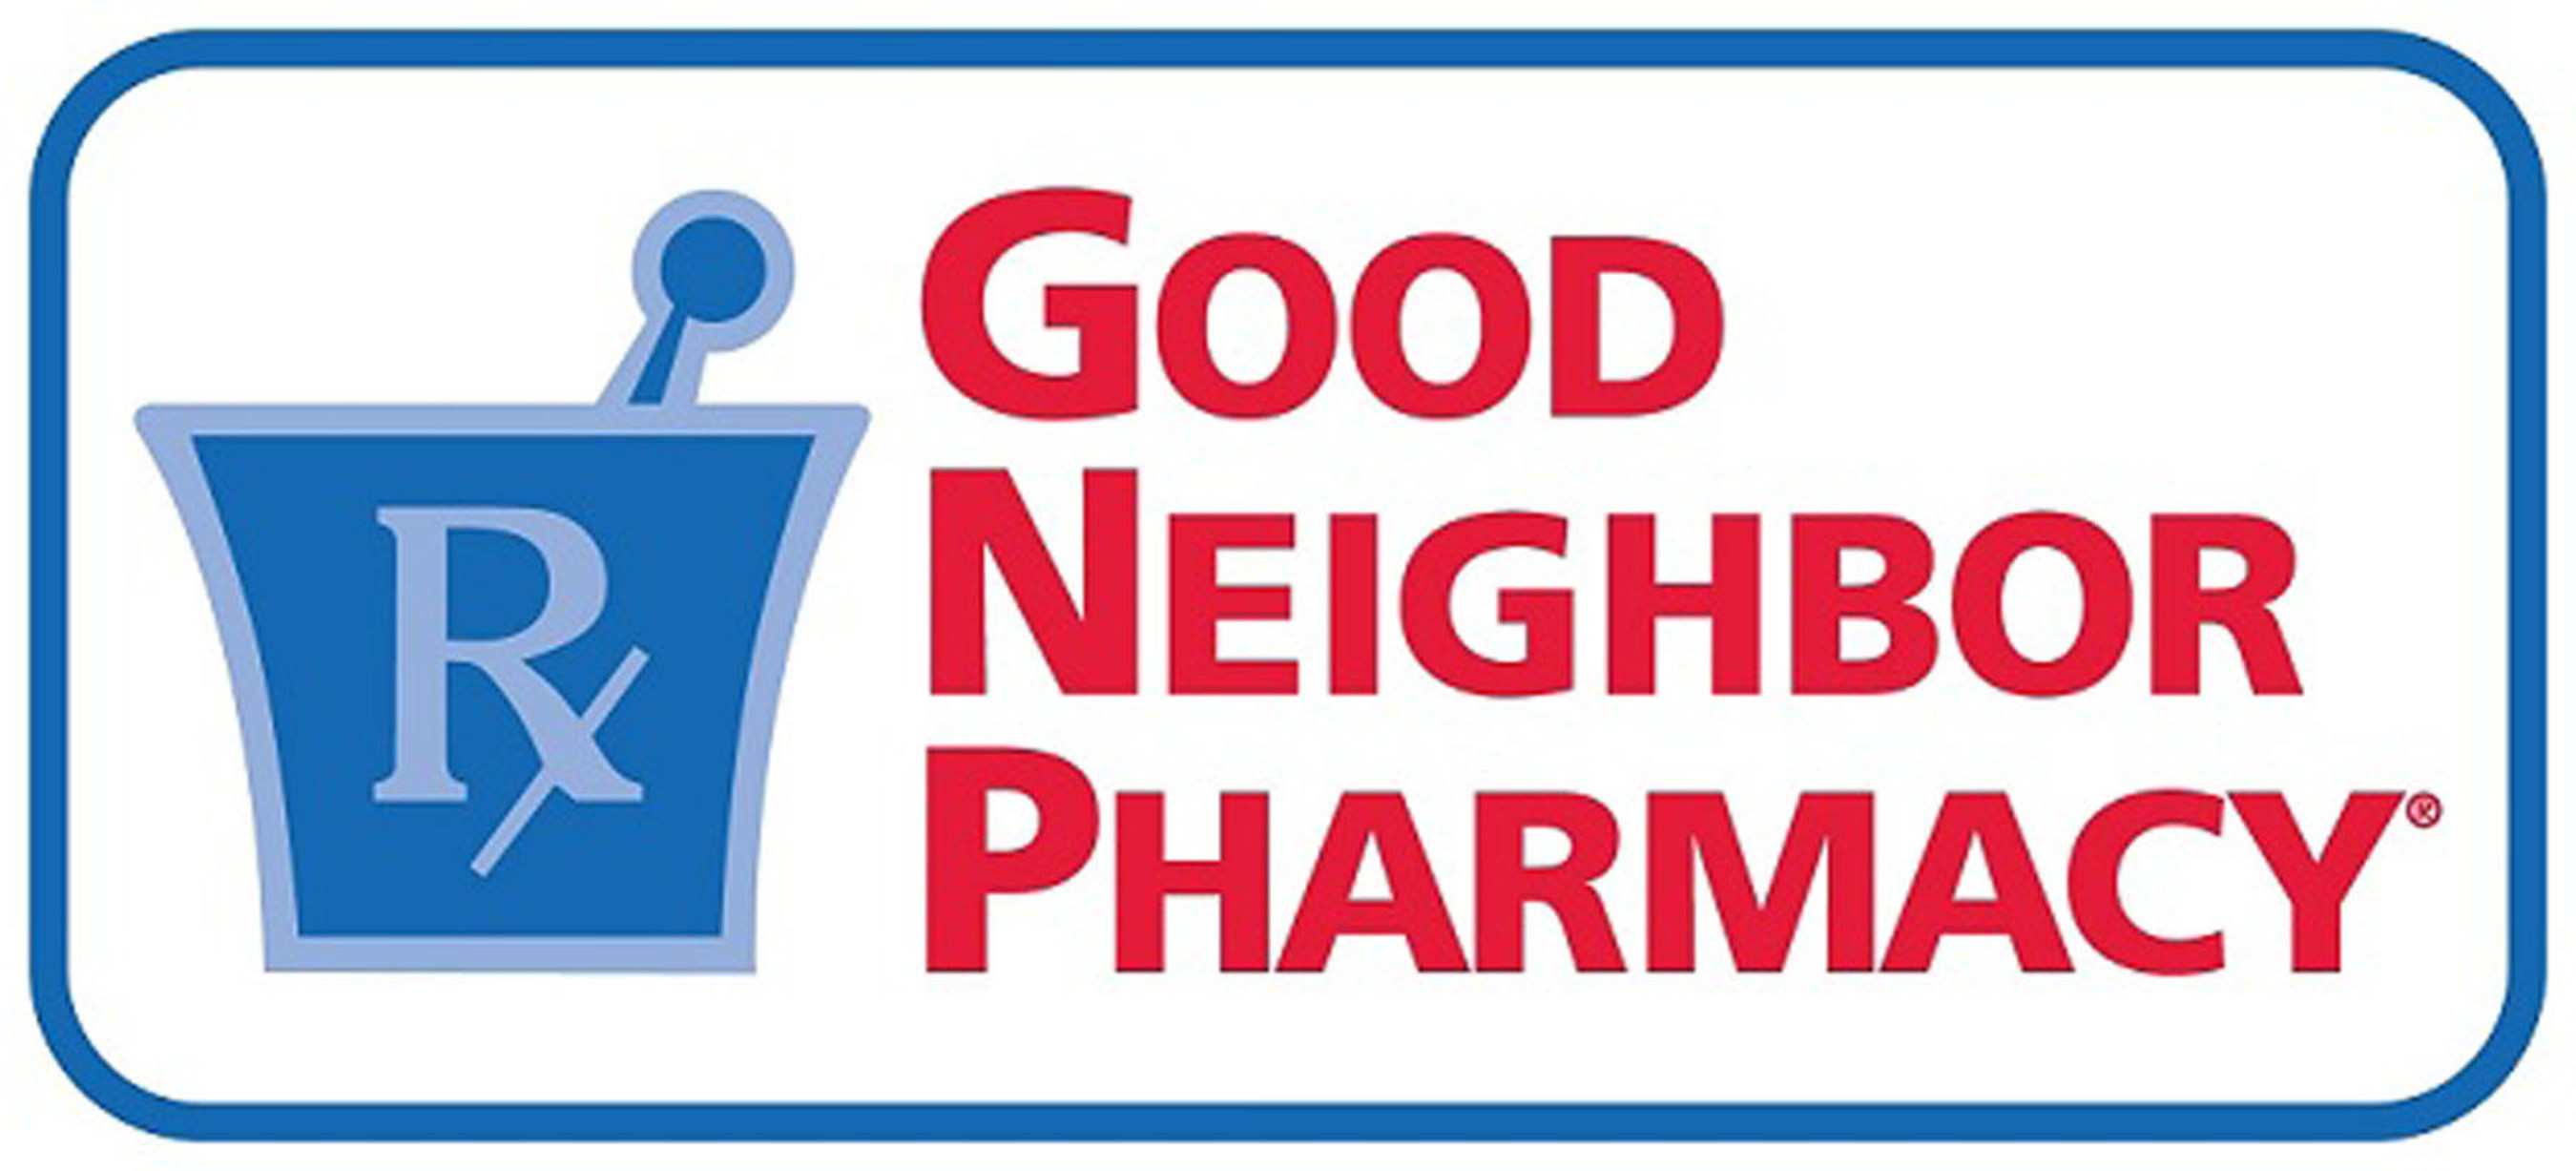 Good Neighbor Pharmacy is the host of ThoughtSpot 2015.